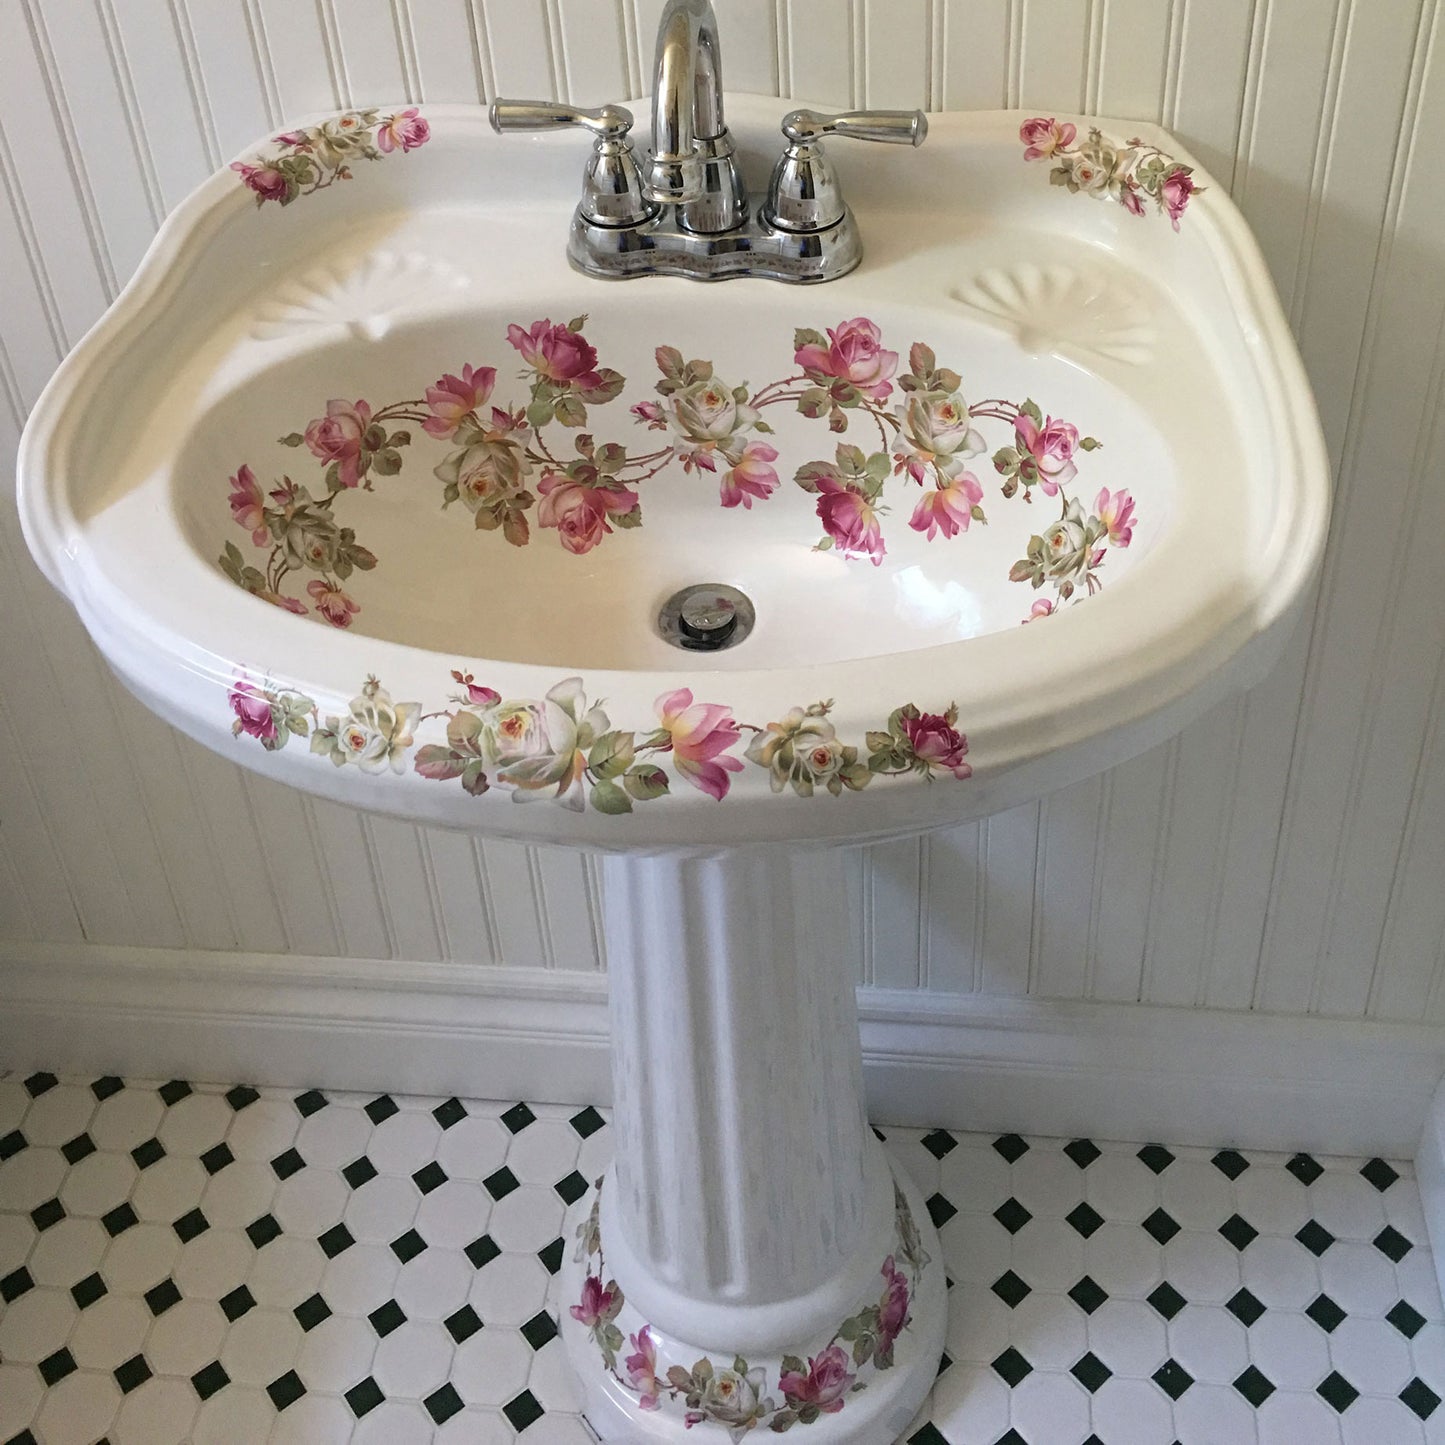 Victorian Bathroom with pink and white roses painted on the pedestal sink